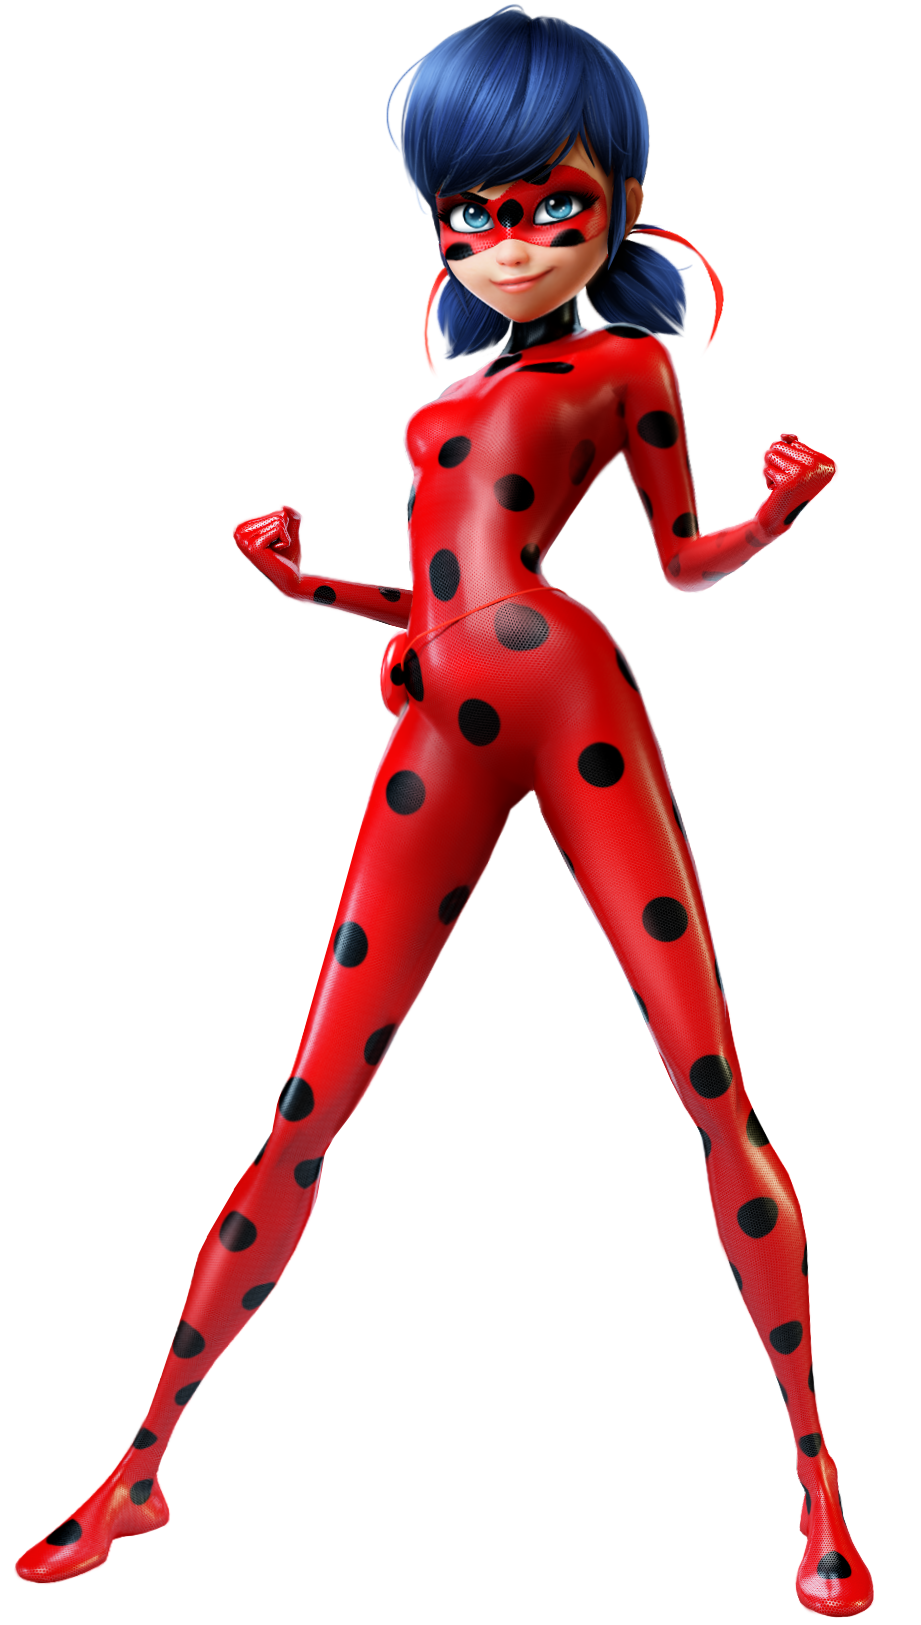 https://static.wikia.nocookie.net/superheroes/images/3/38/Ladybug.png/revision/latest?cb=20200509190549